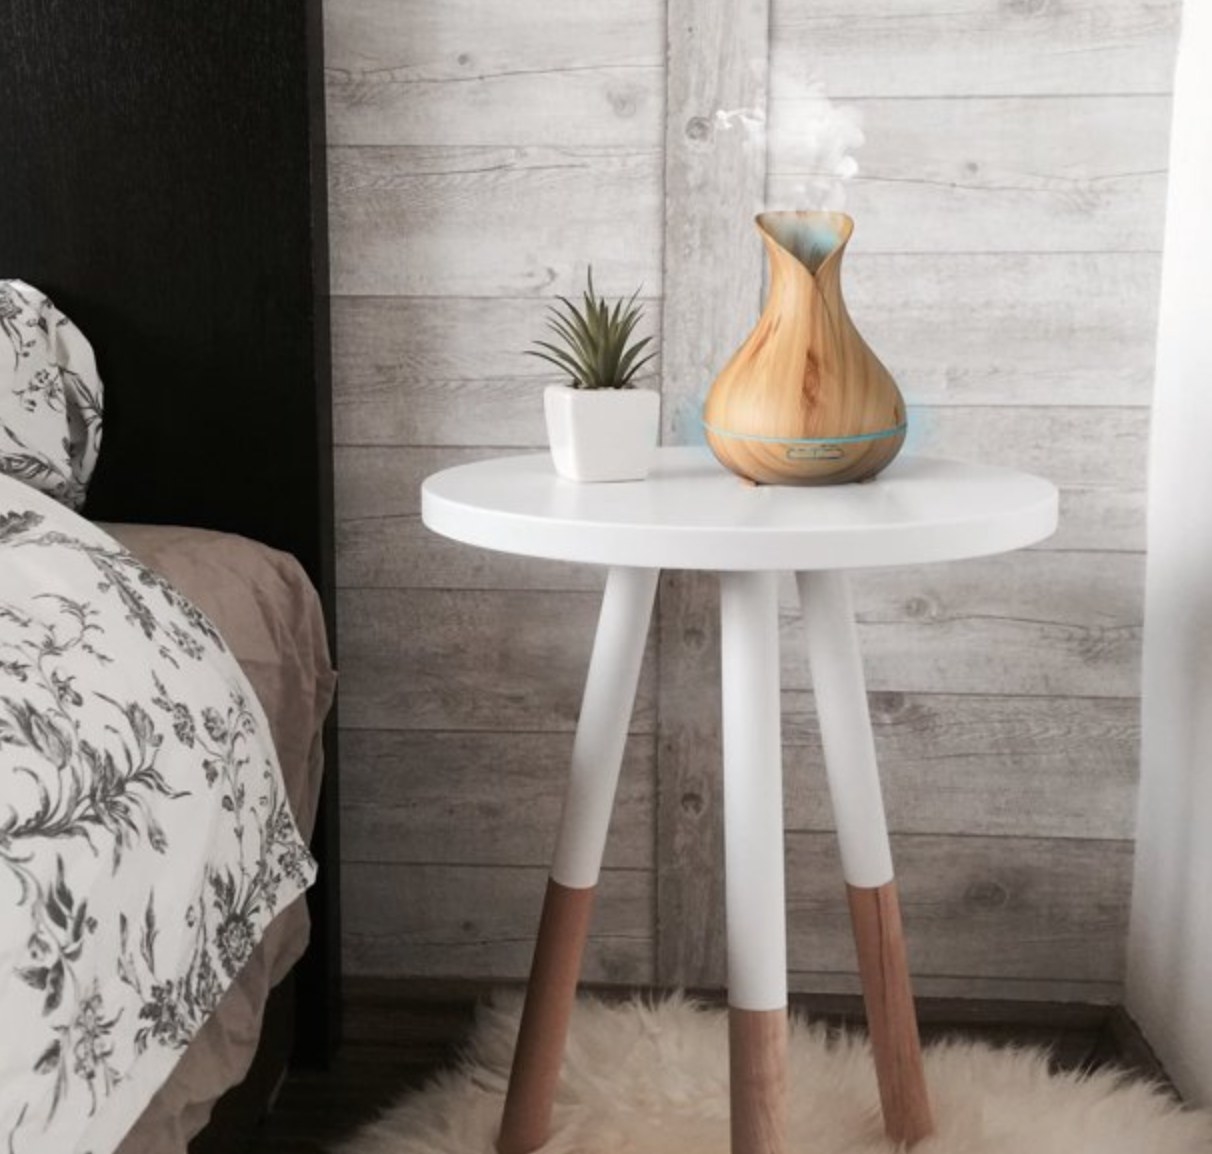 the diffuser on a bedside table